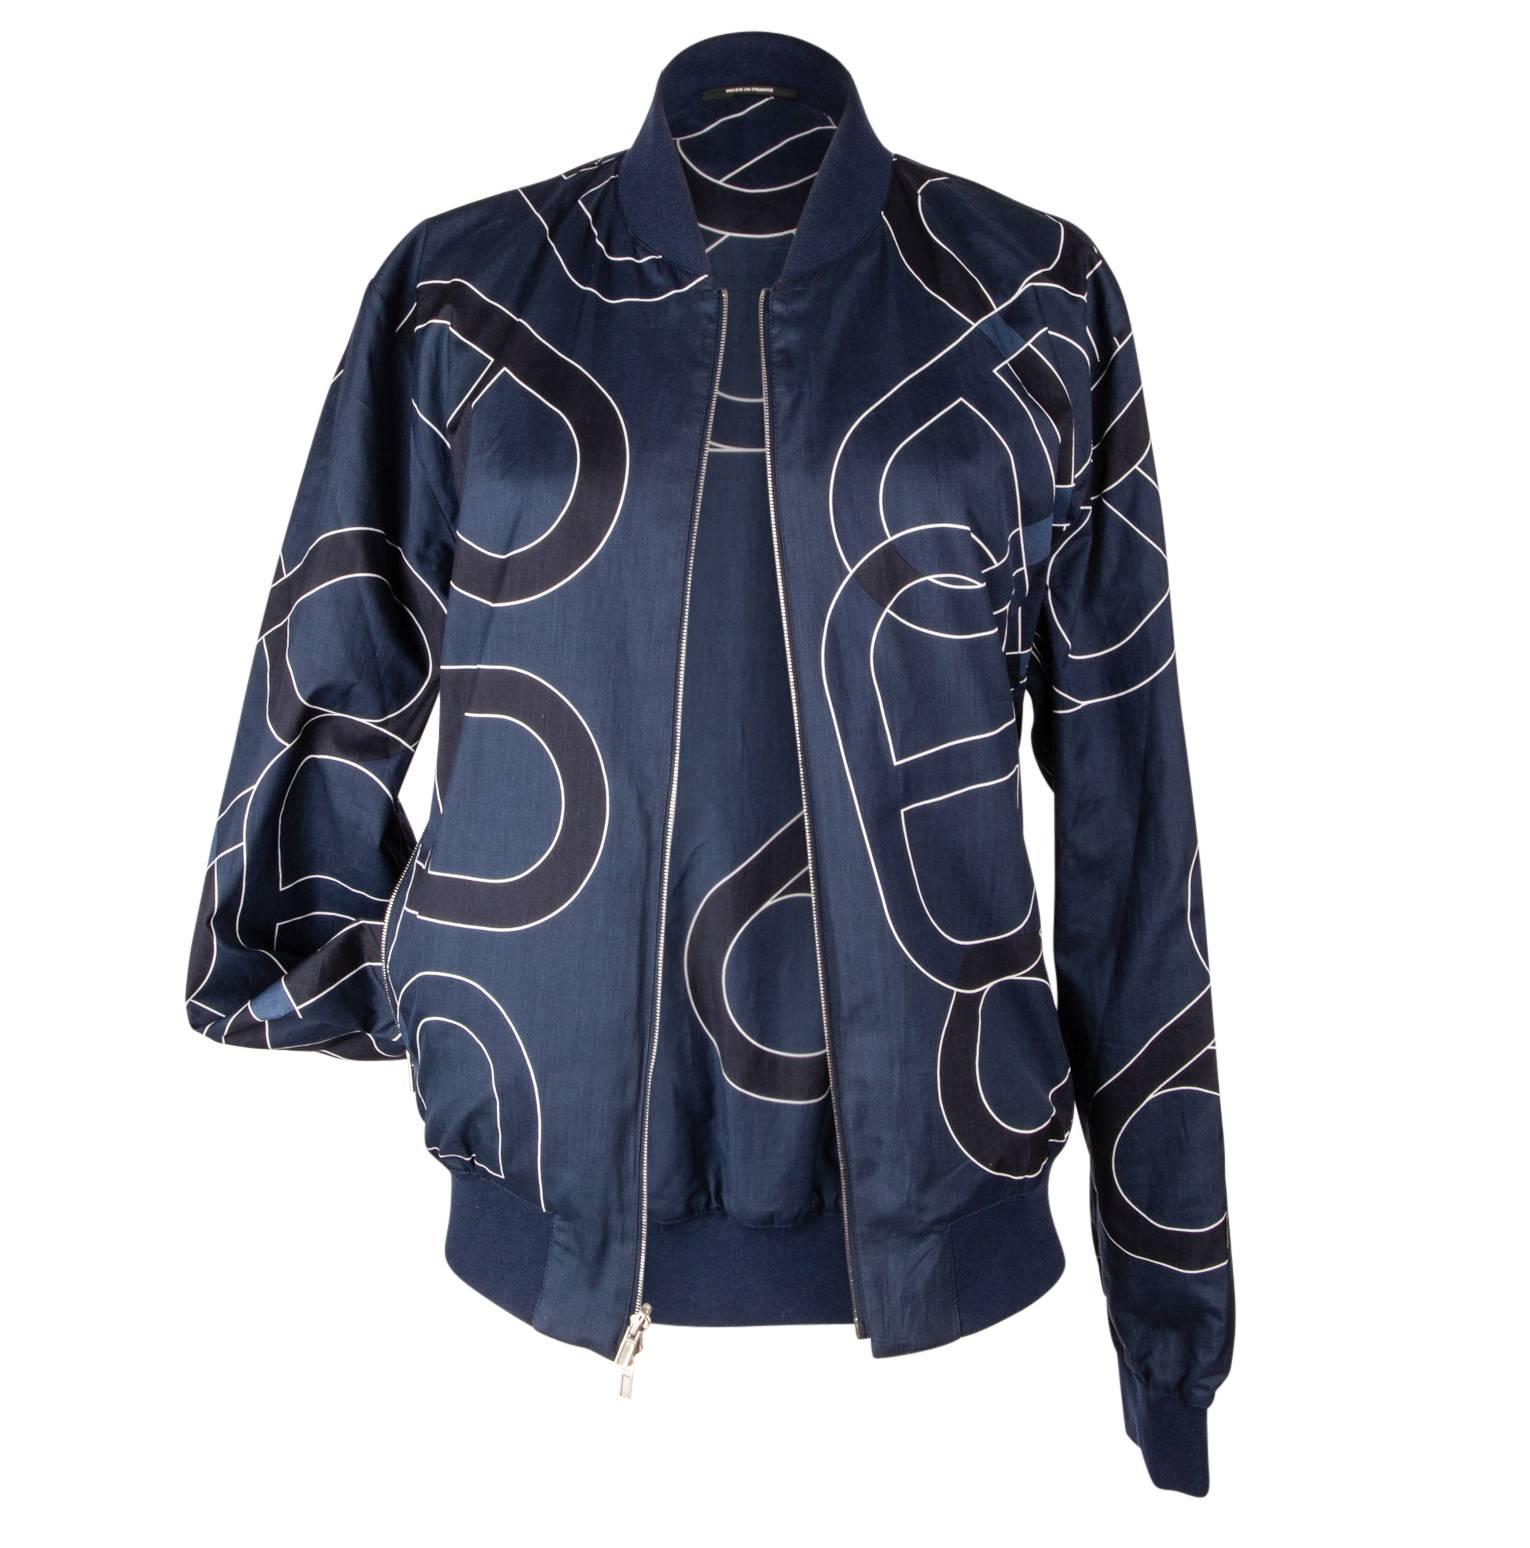 Hermes Men's Jacket Chaine D'Ancre Blue Reversible Windbreaker 50 / 40 New In New Condition For Sale In Miami, FL